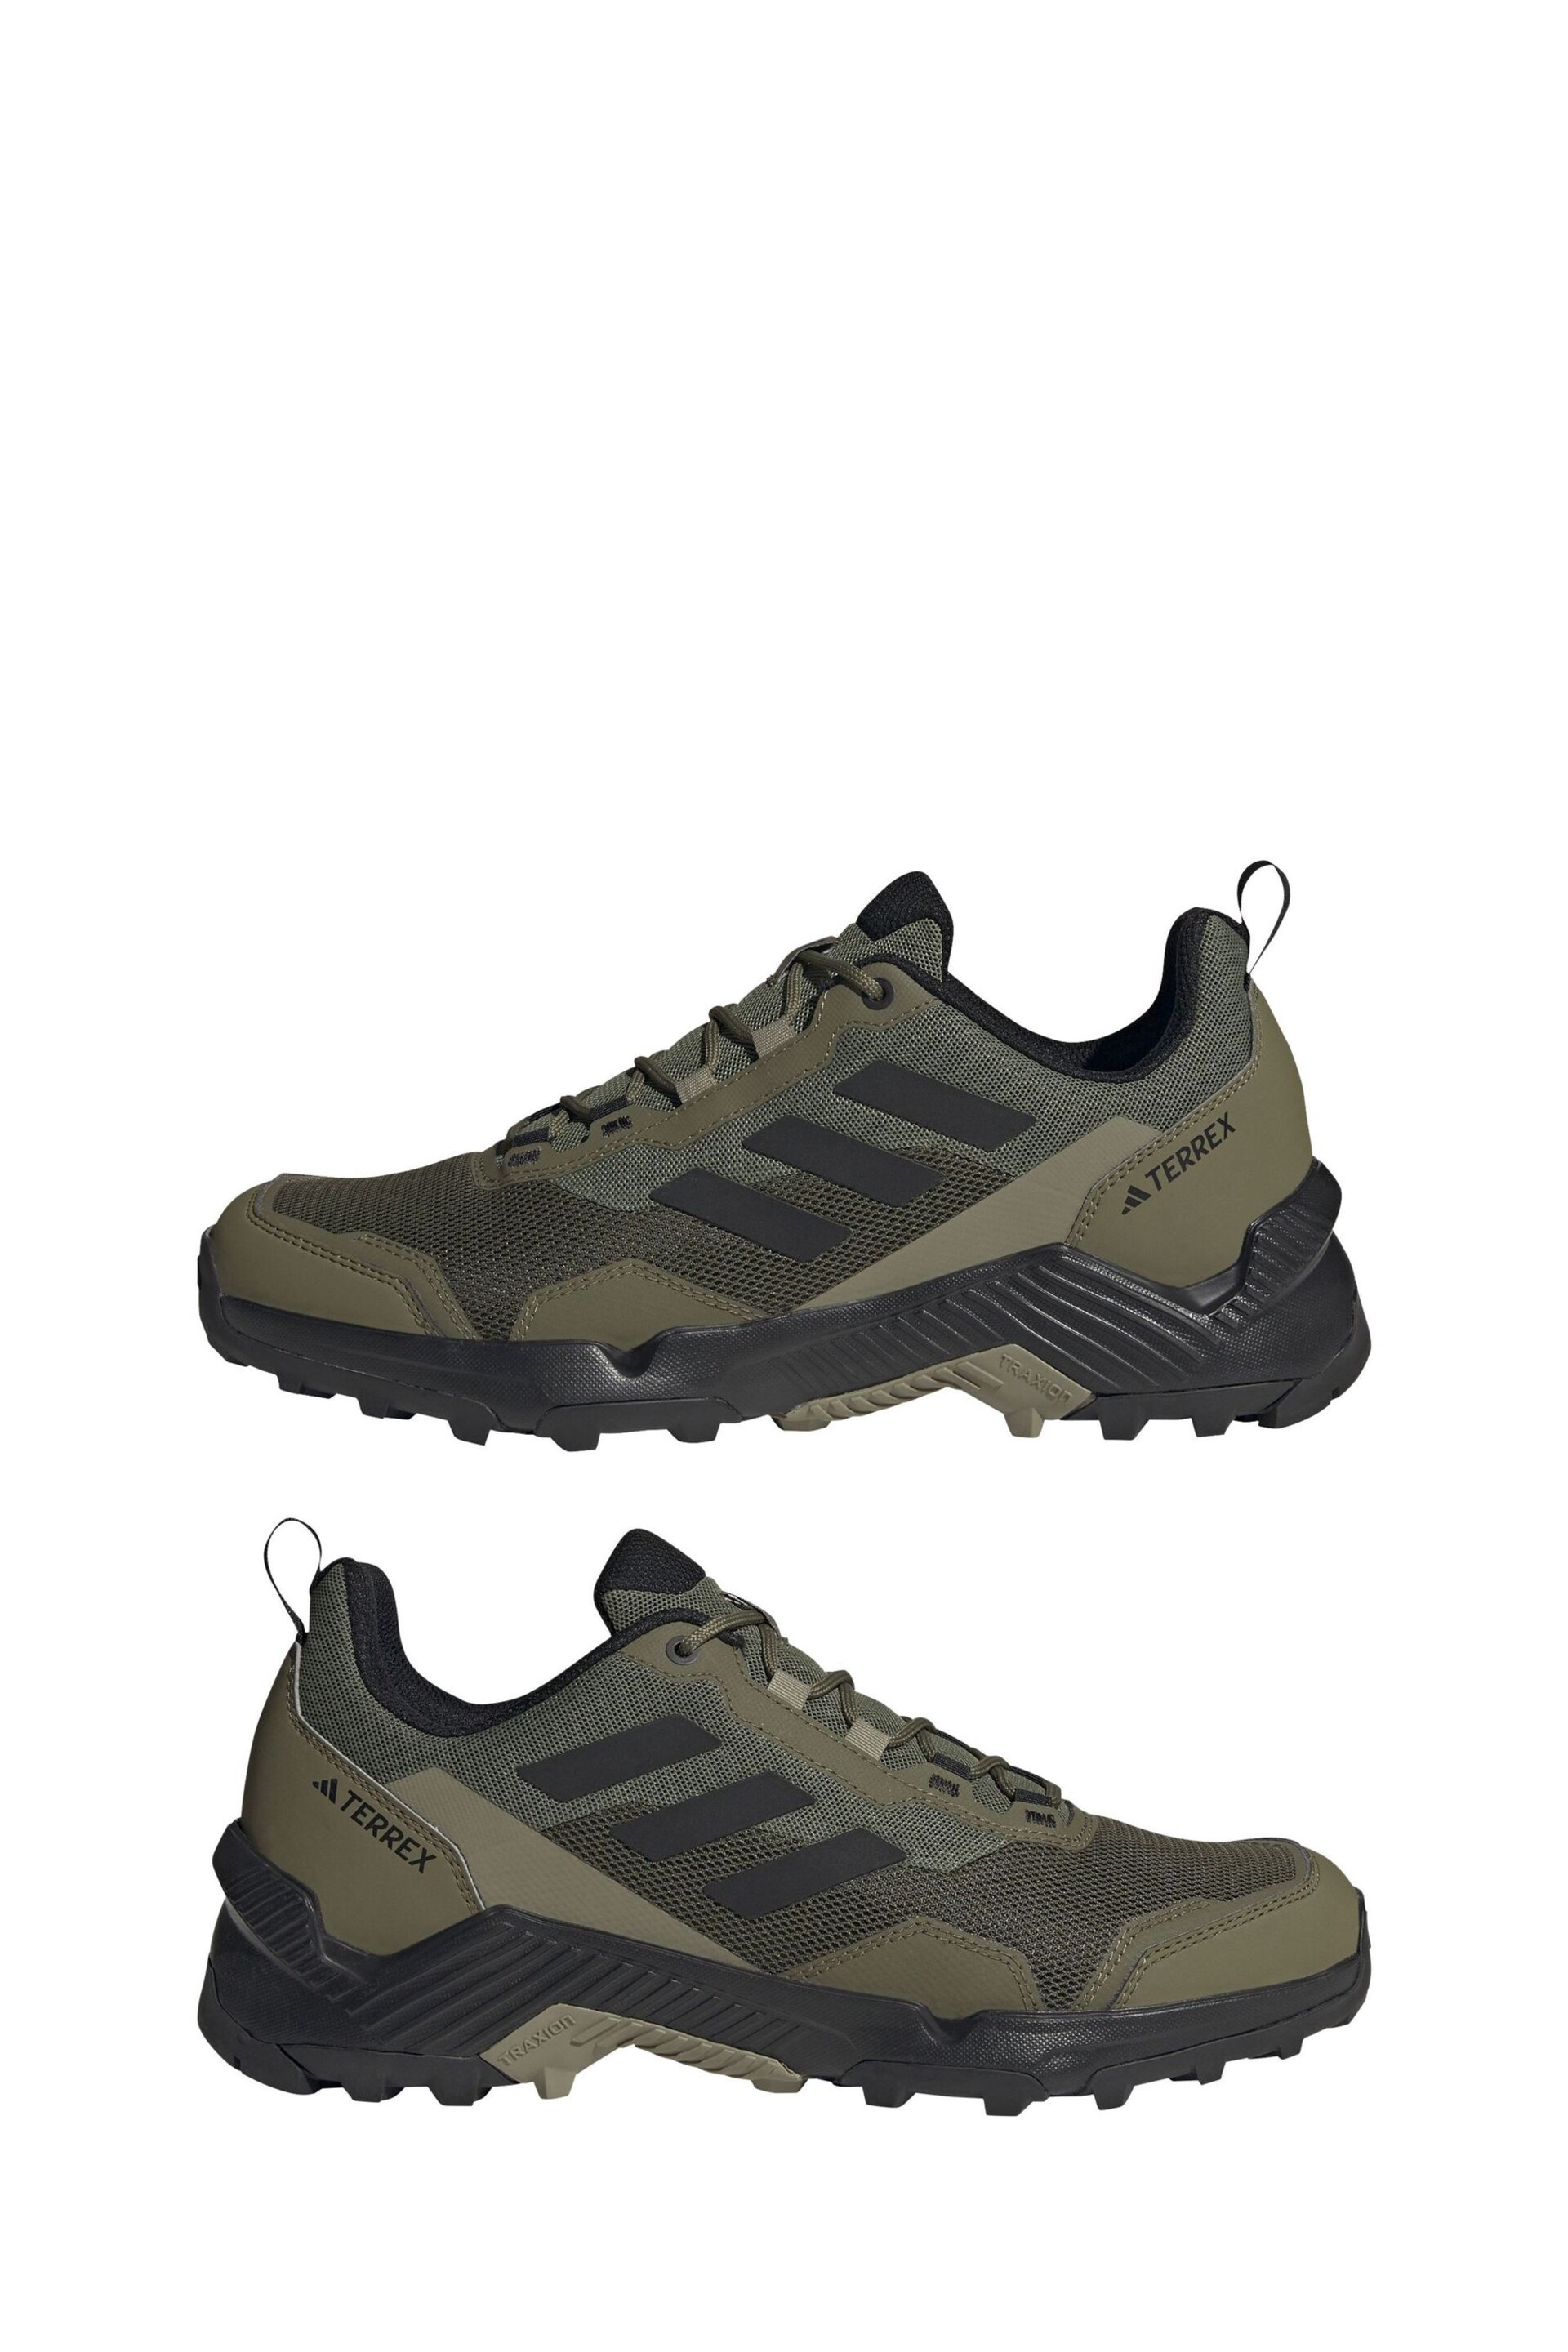 adidas Terrex Eastrail 2 Trainers - Image 6 of 10